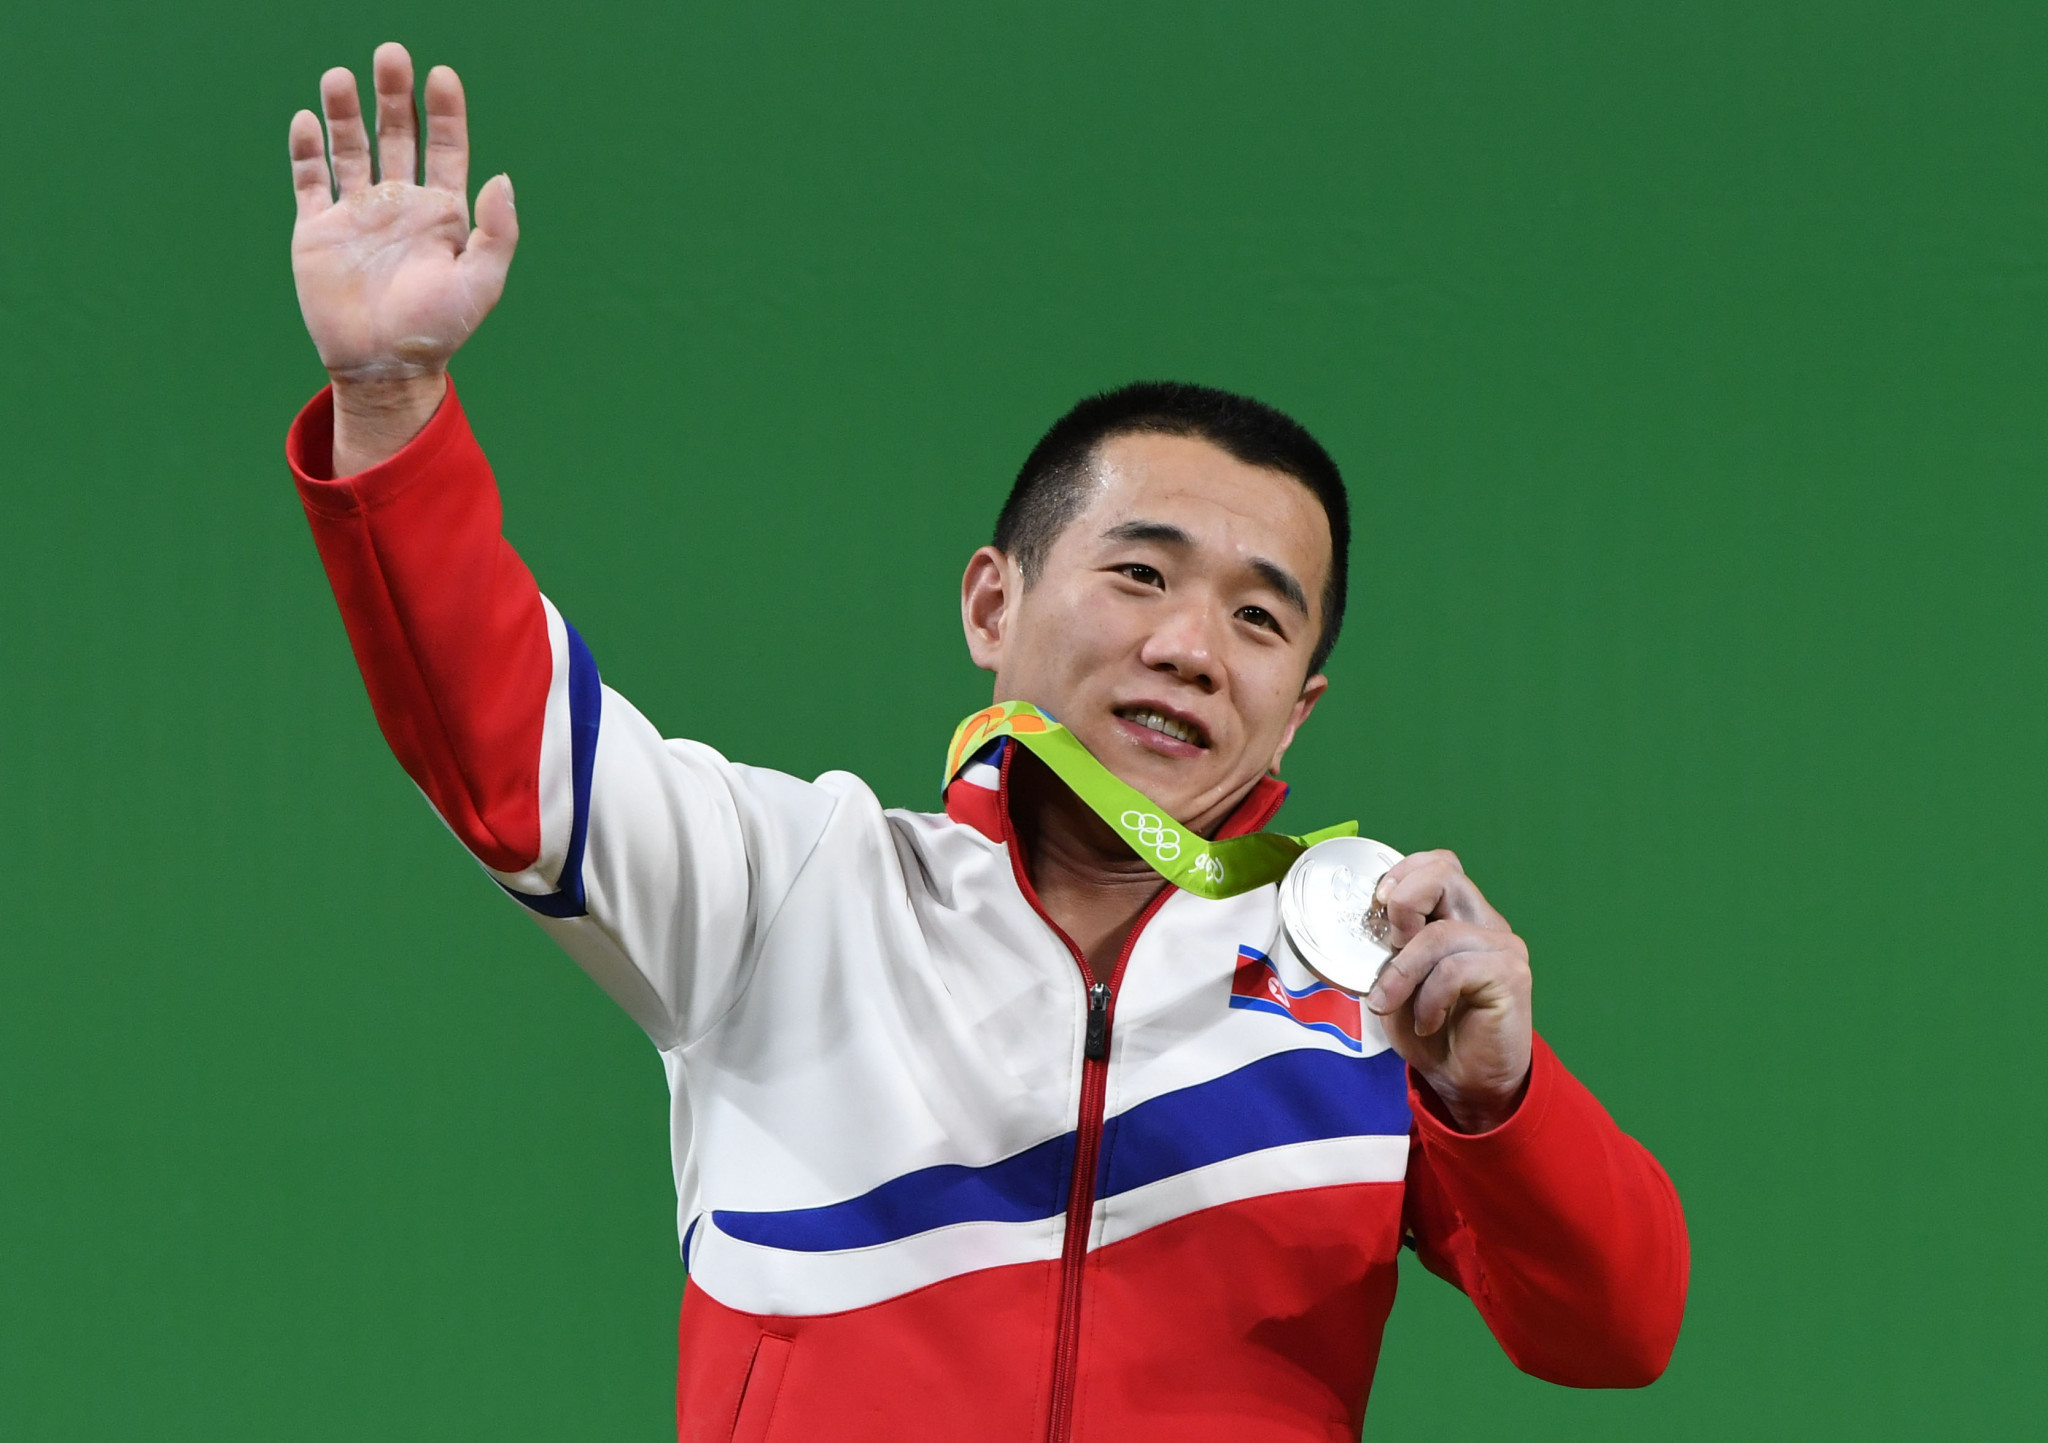 Om Yun Chol had been expected to bring North Korea a medal at Anaheim ©Getty Images